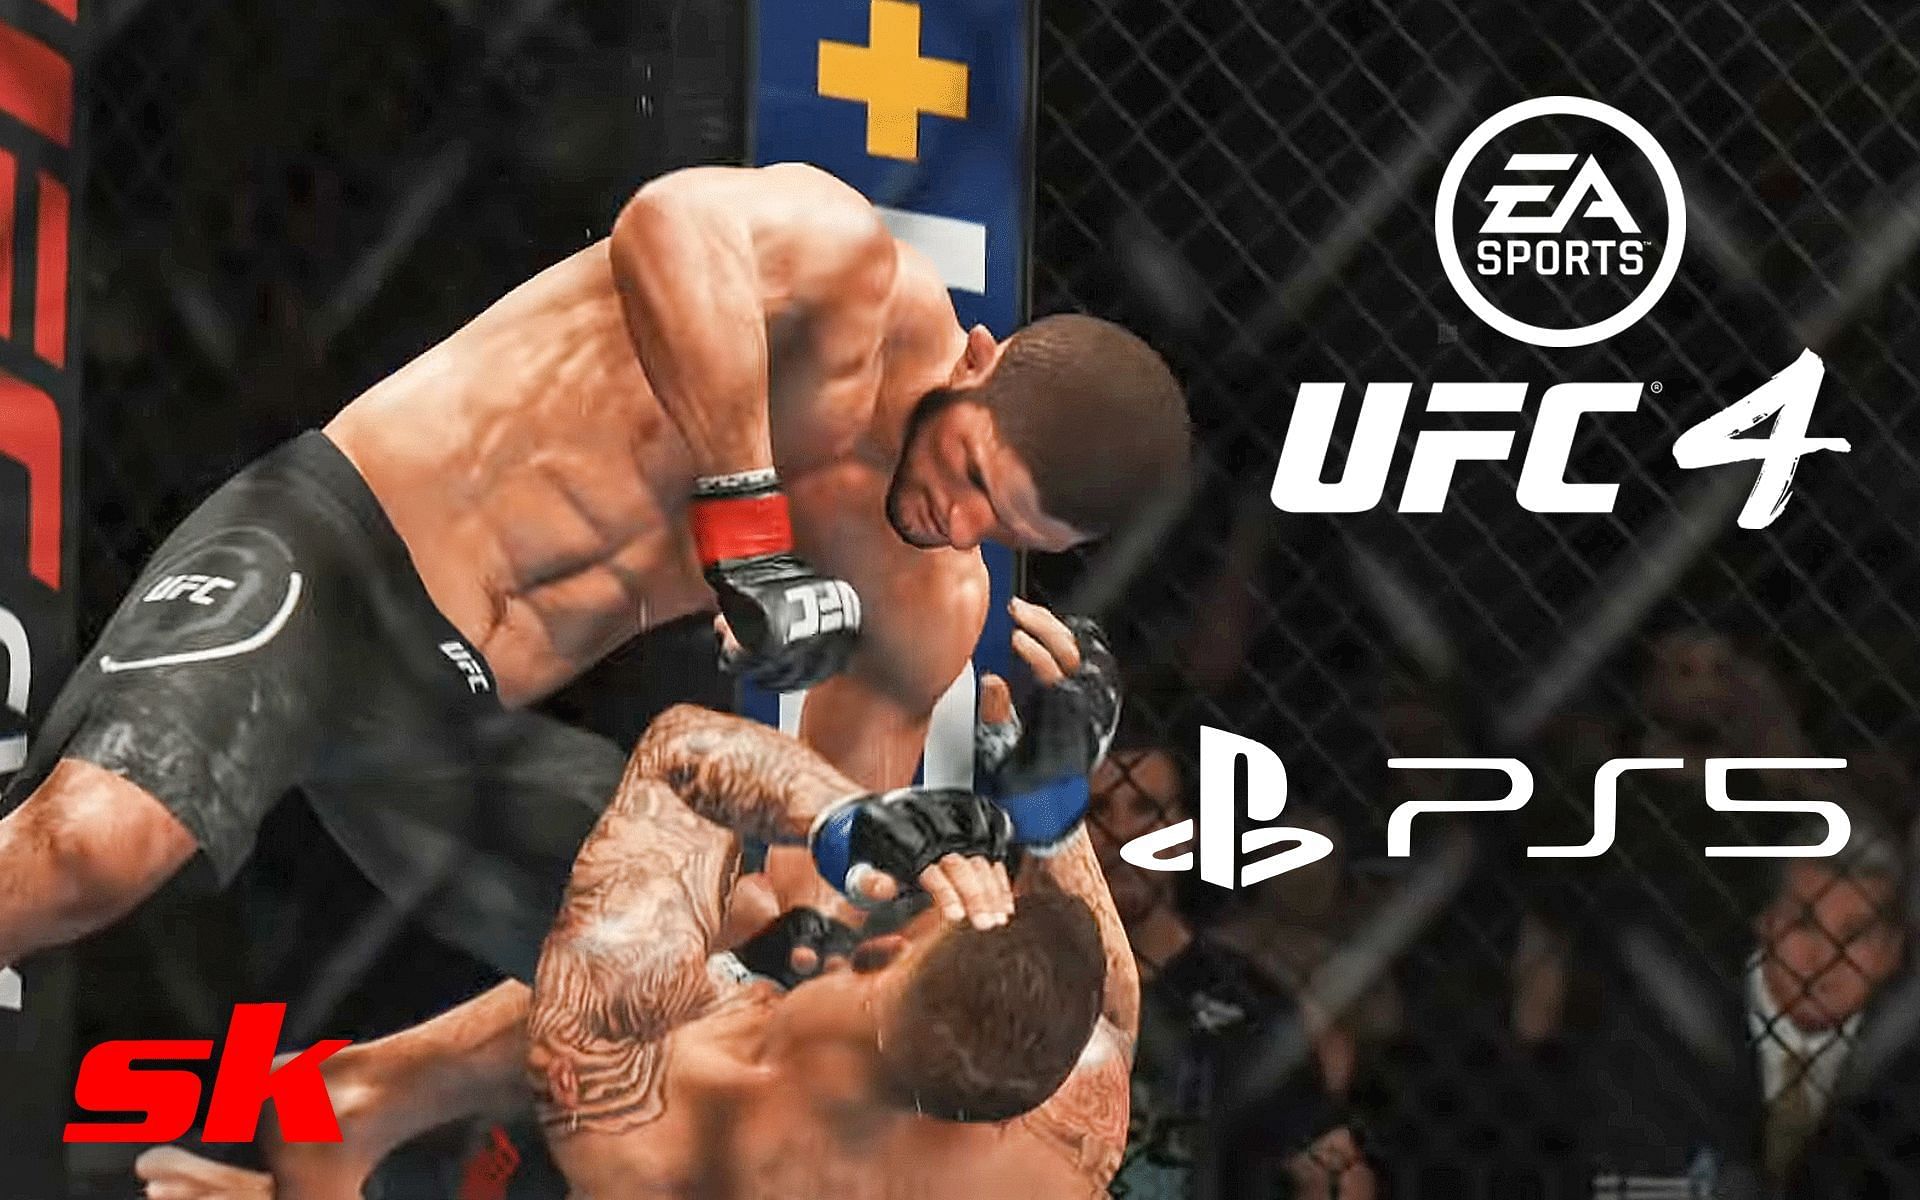 UFC 4: Does UFC 4 work PS5? Here the compatibility details of the EA Sports game